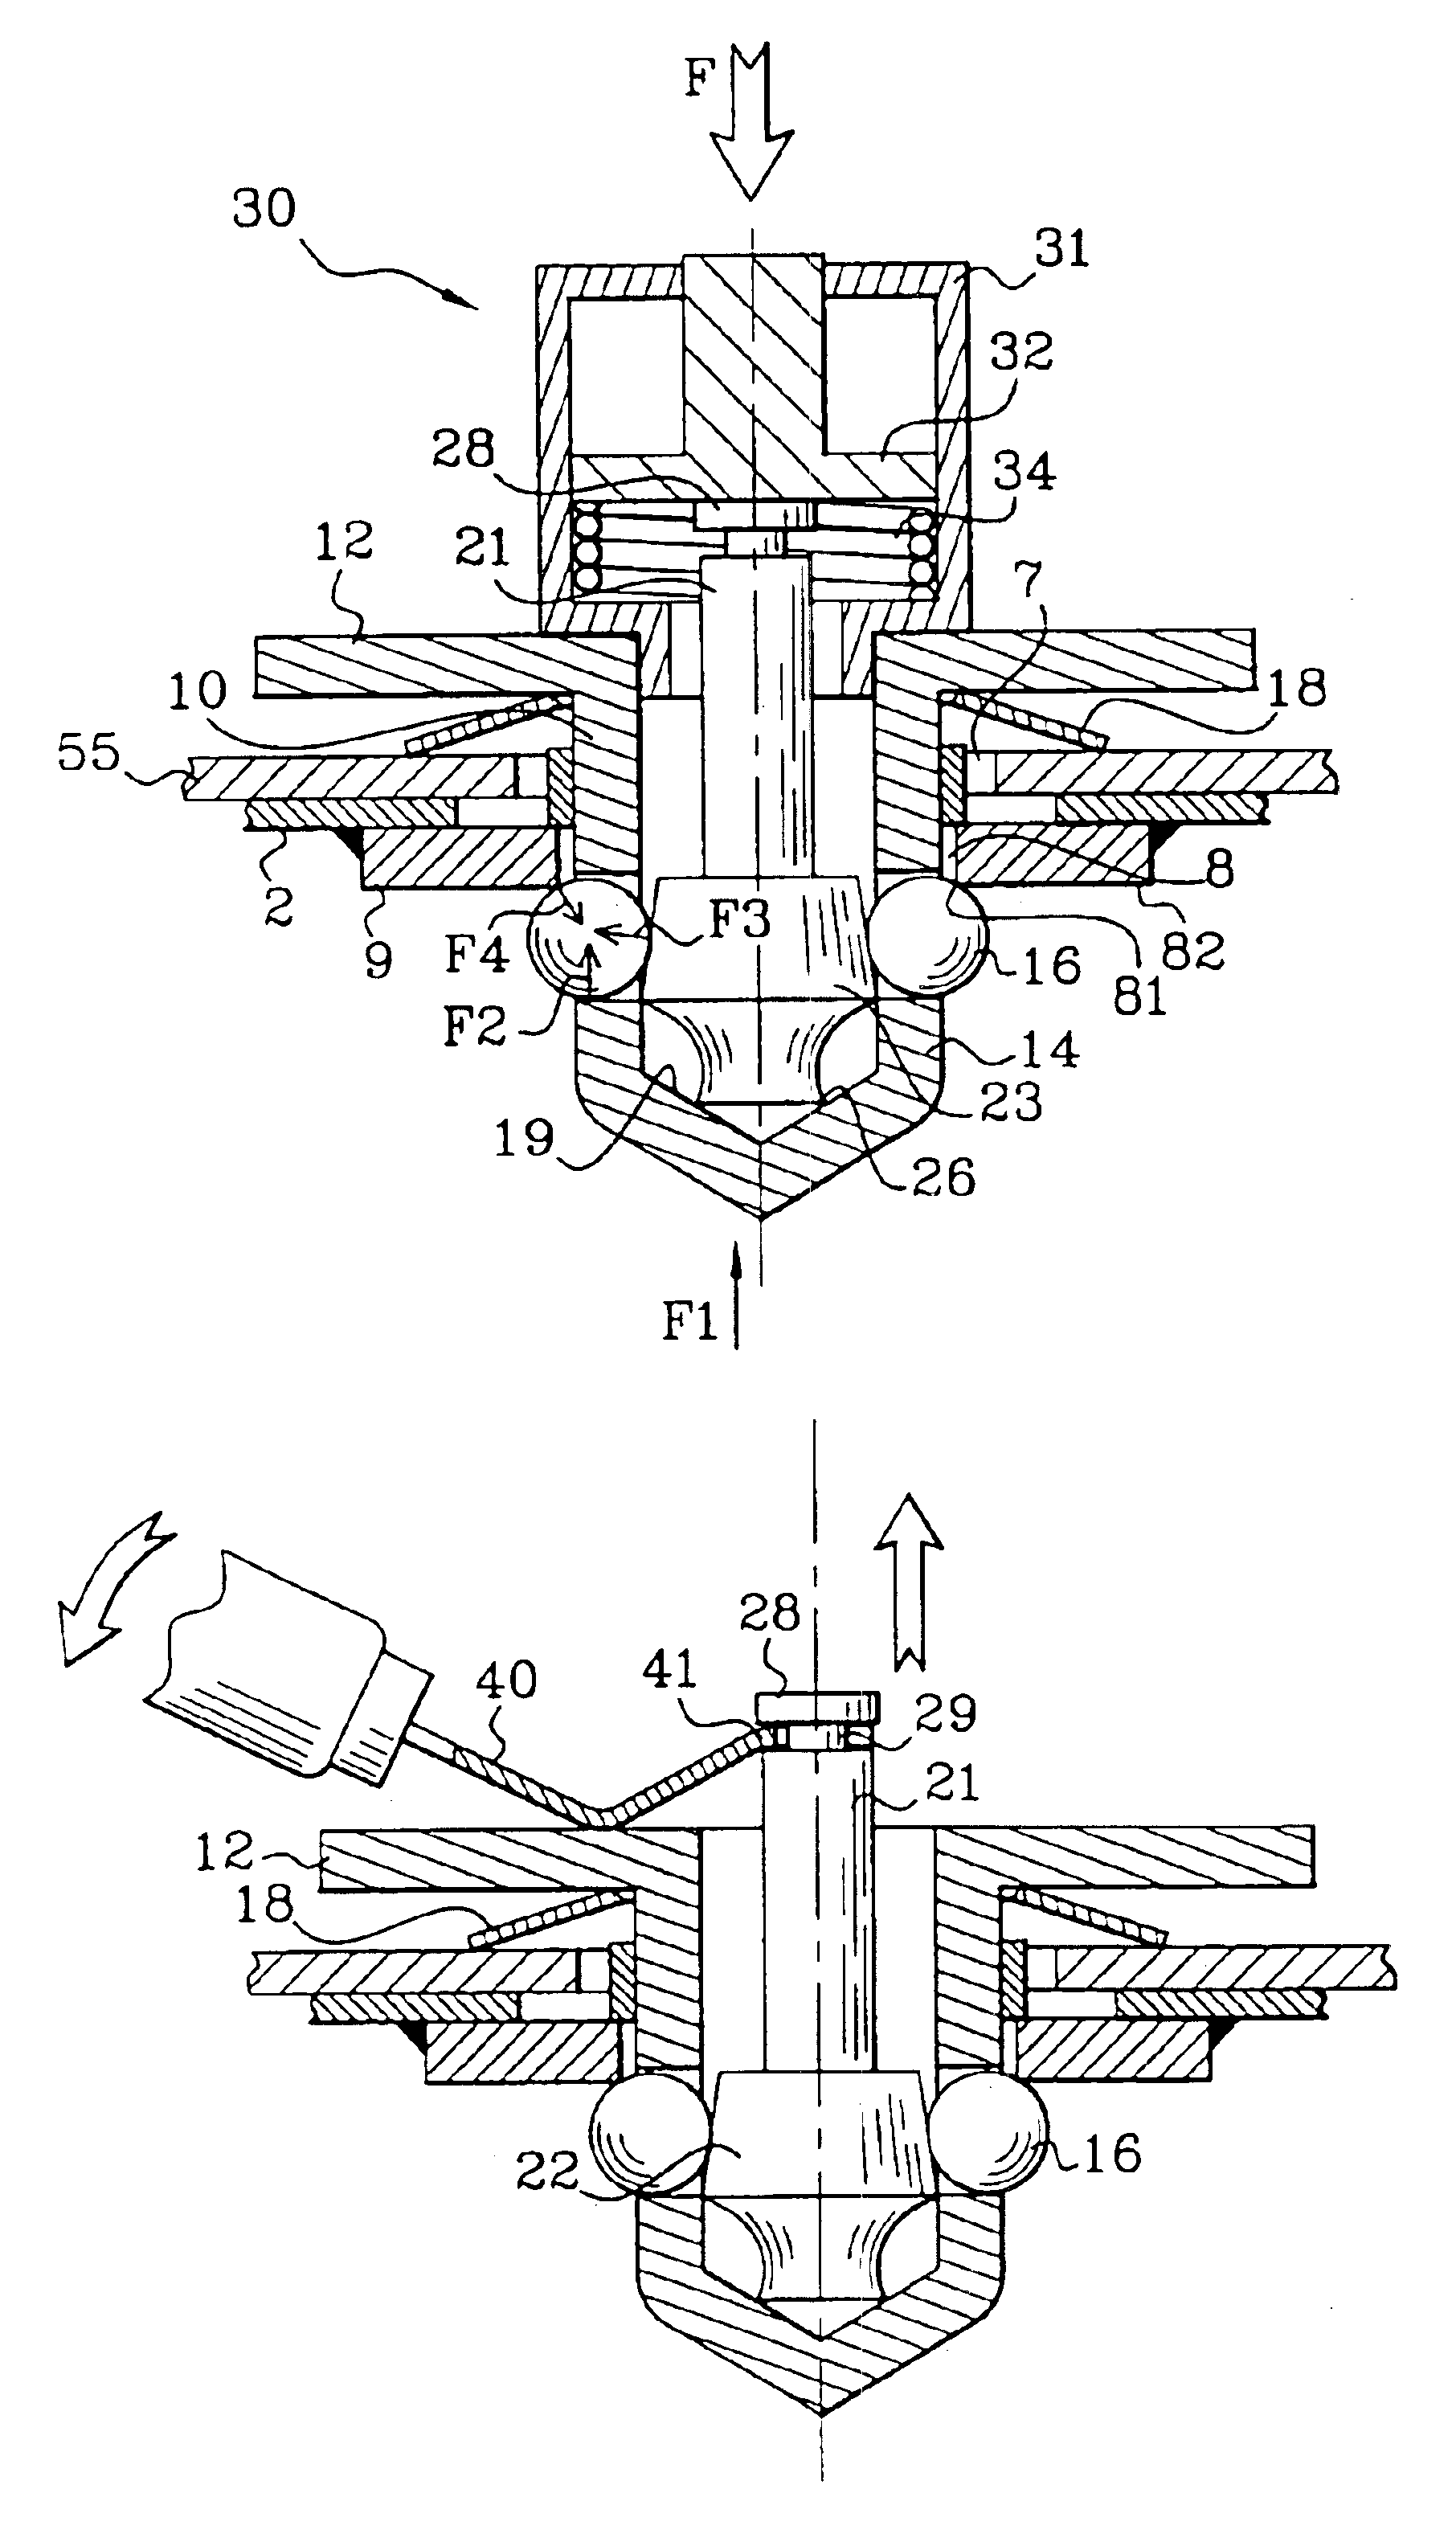 Assembly system based on a ball anchoring device